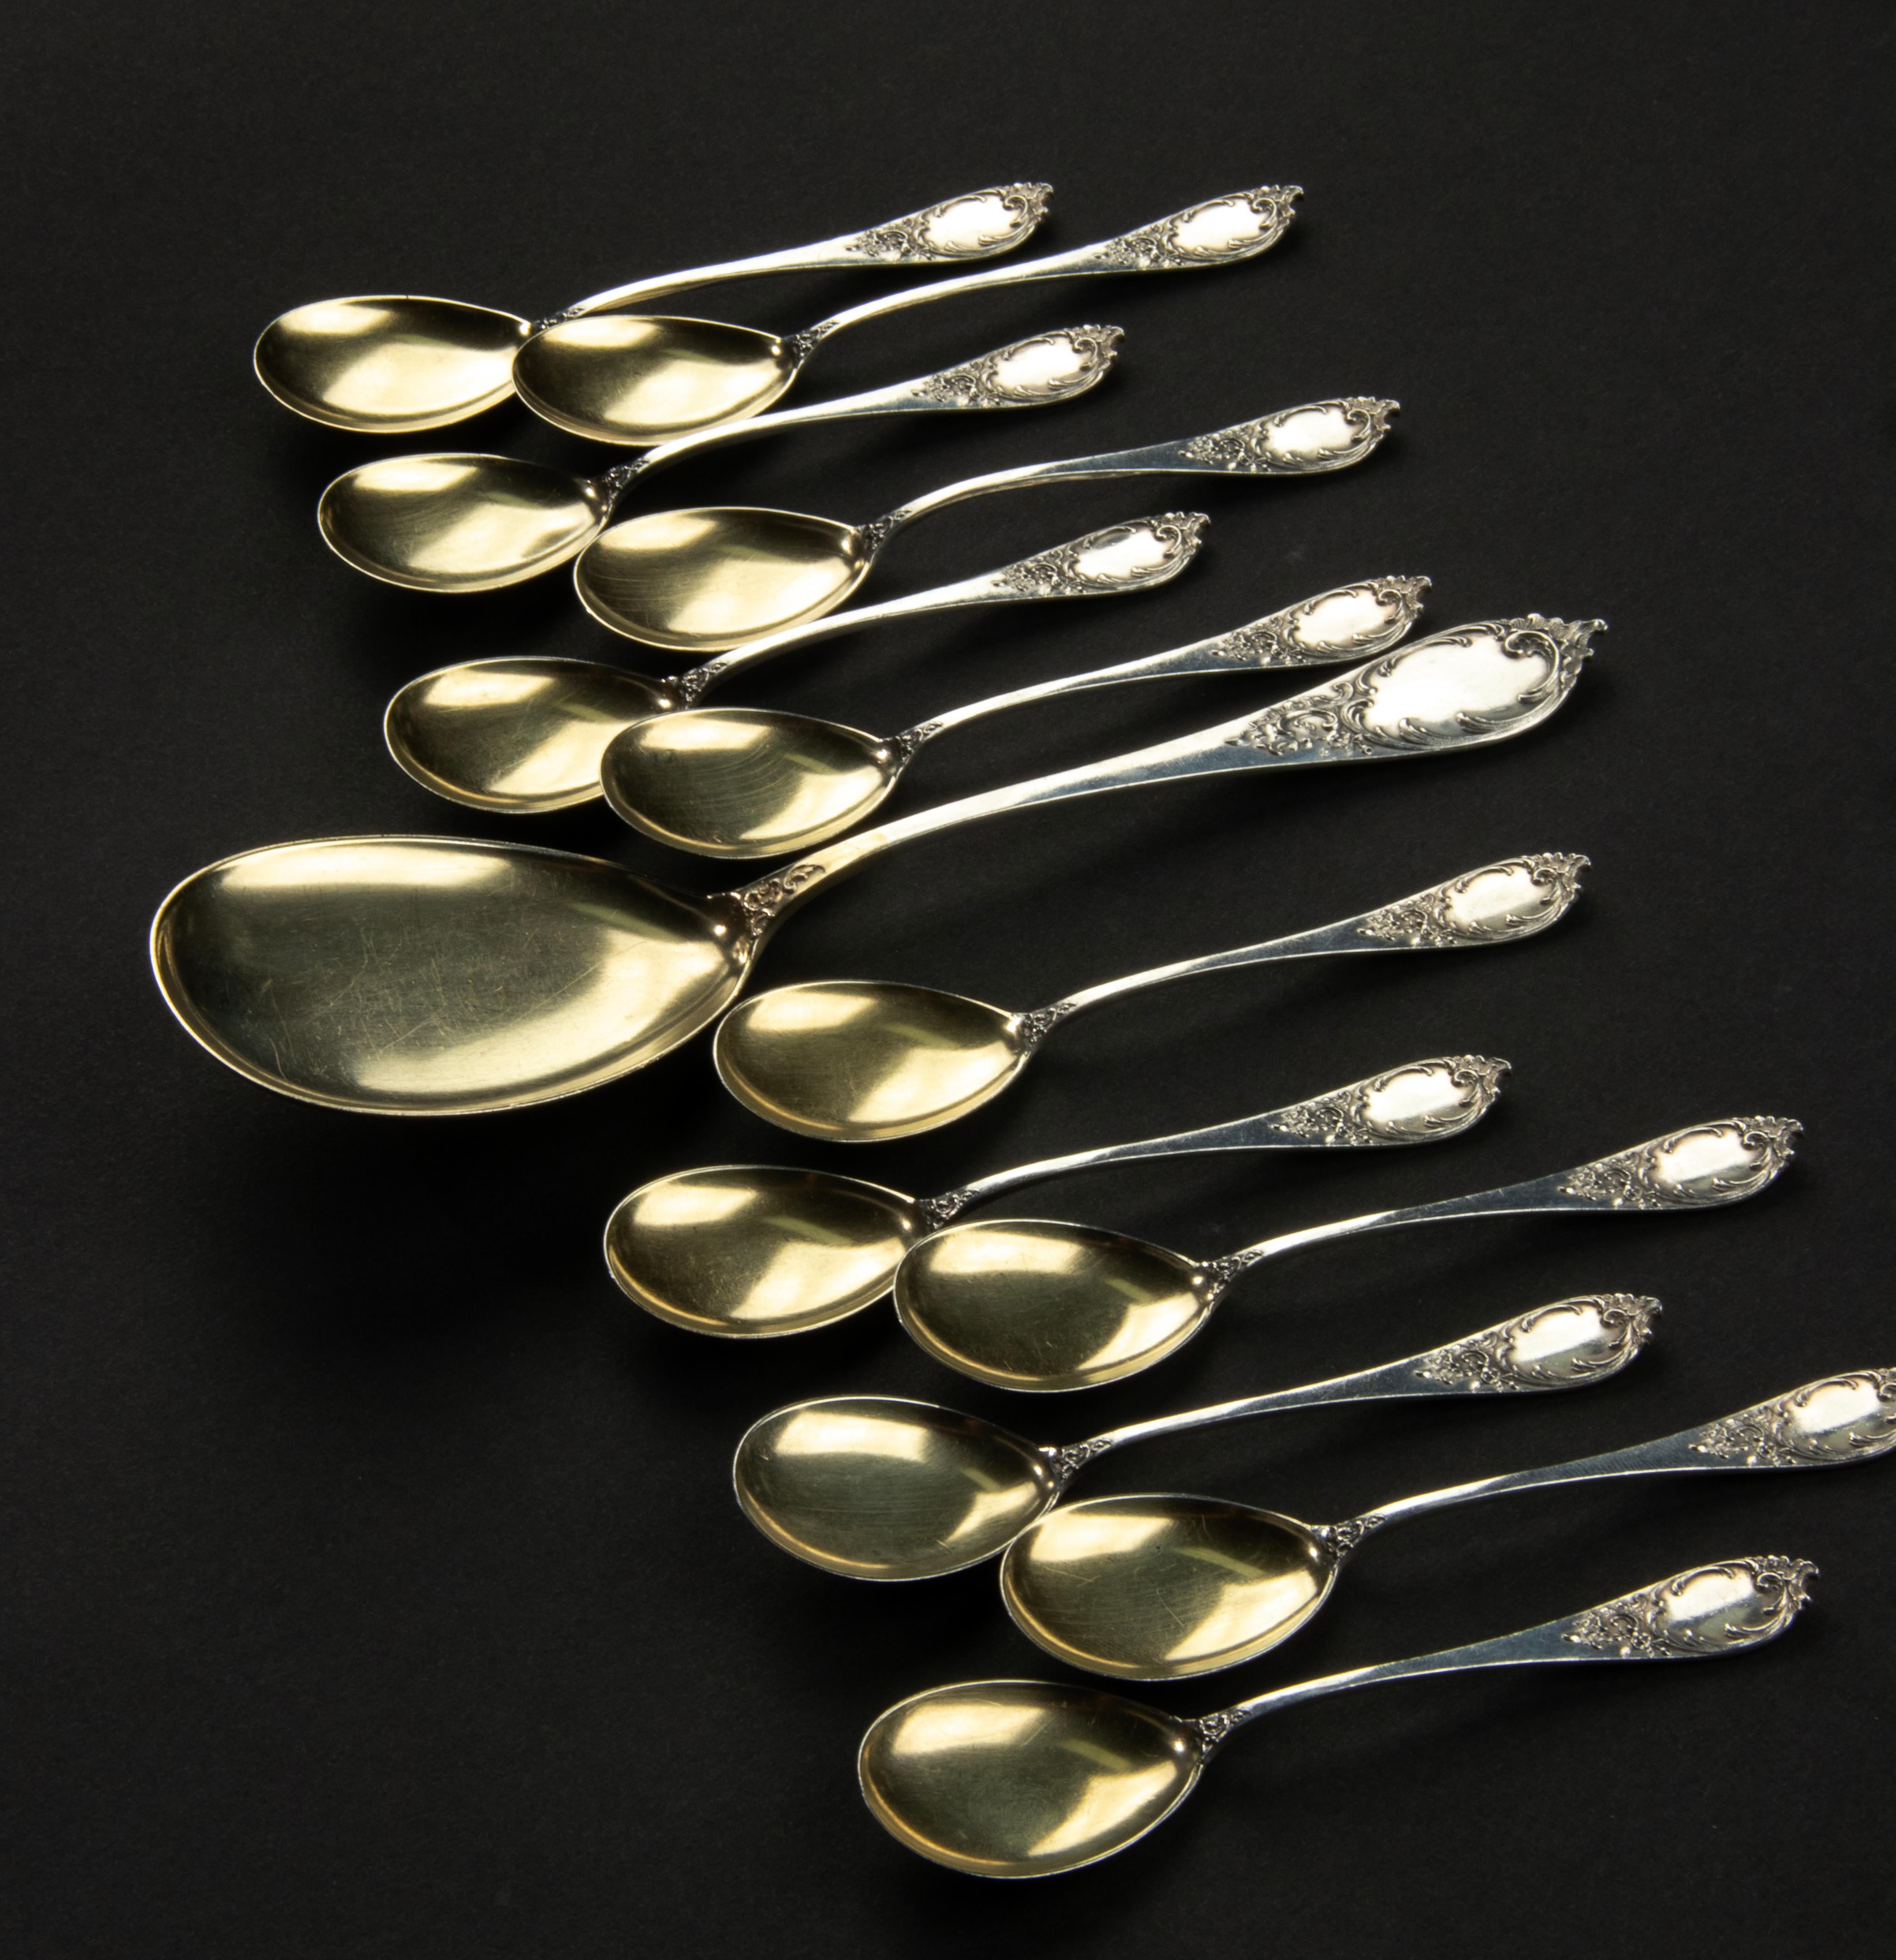 13-Piece Set of Solid Silver Ice Cream Spoons, Late 19th Century For Sale 5